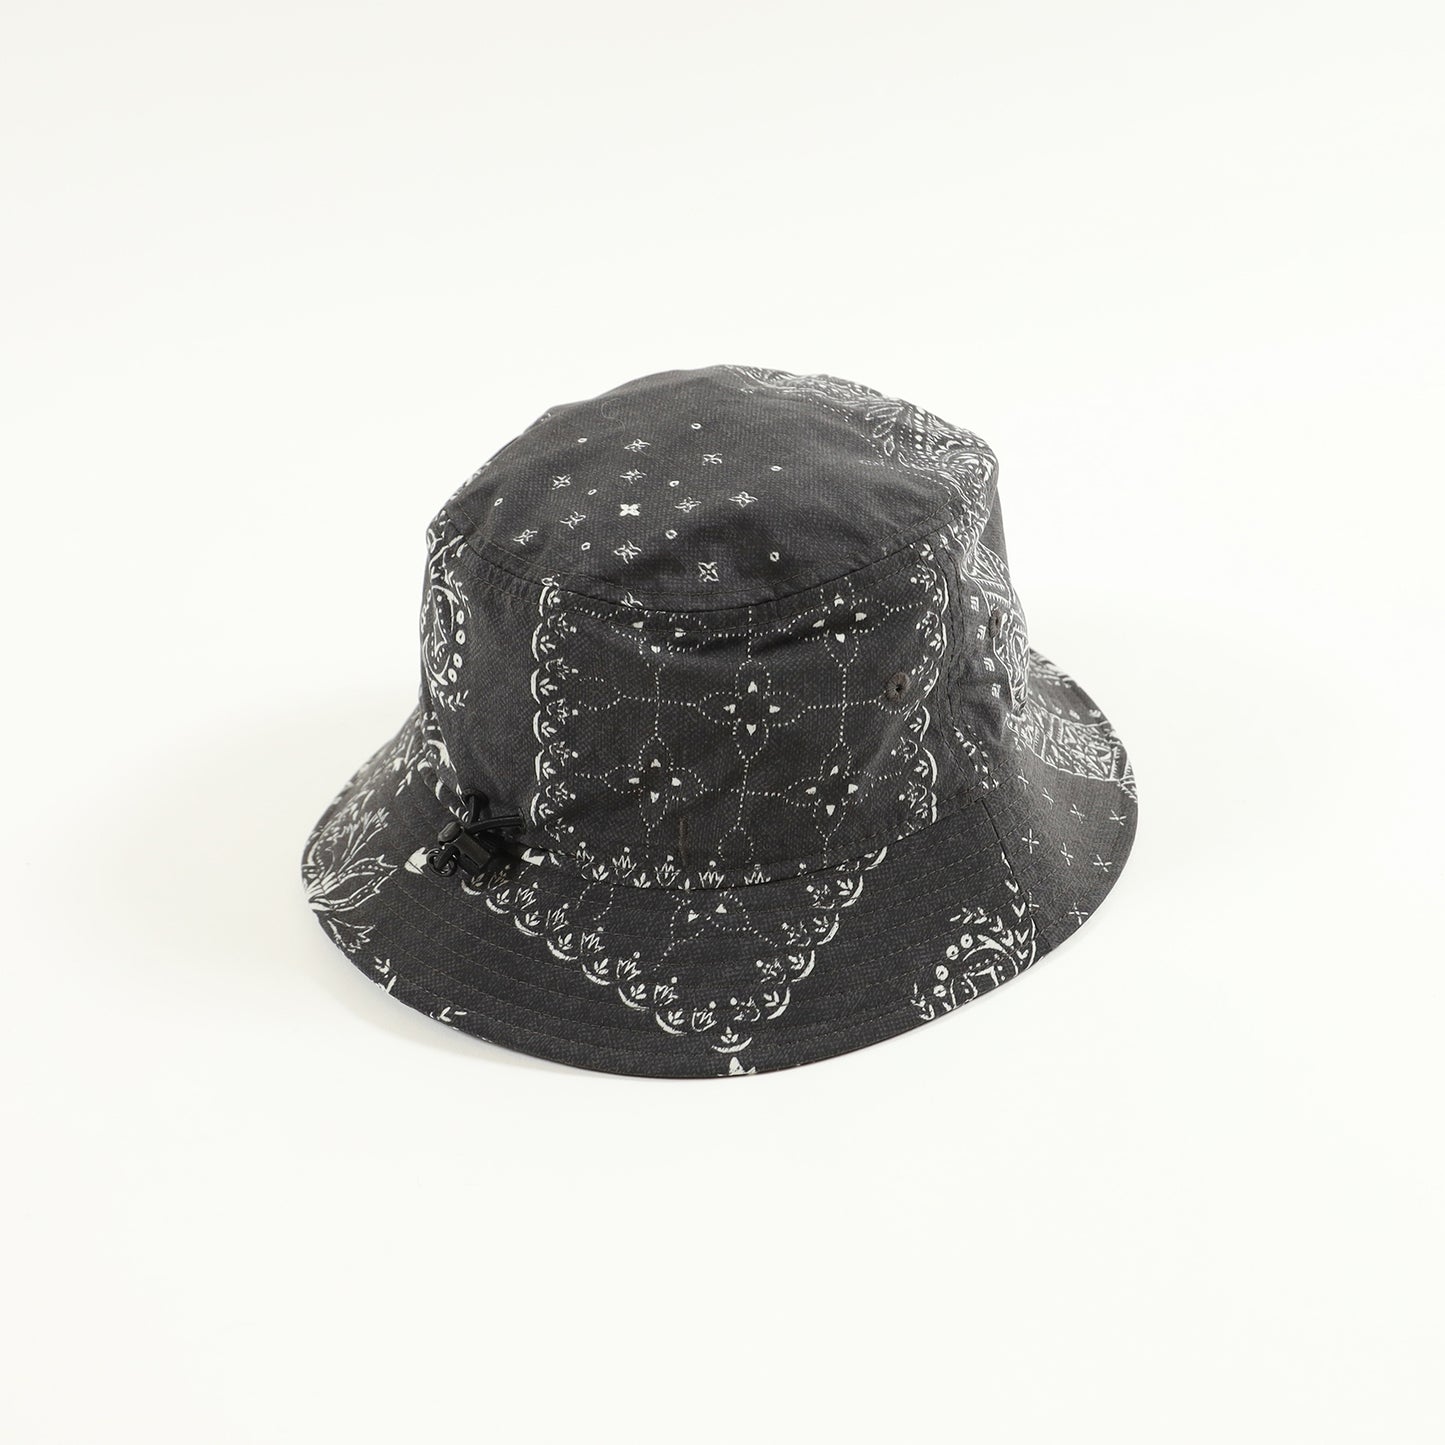 【THE NORTH FACE】Novelty Camp Side Hat